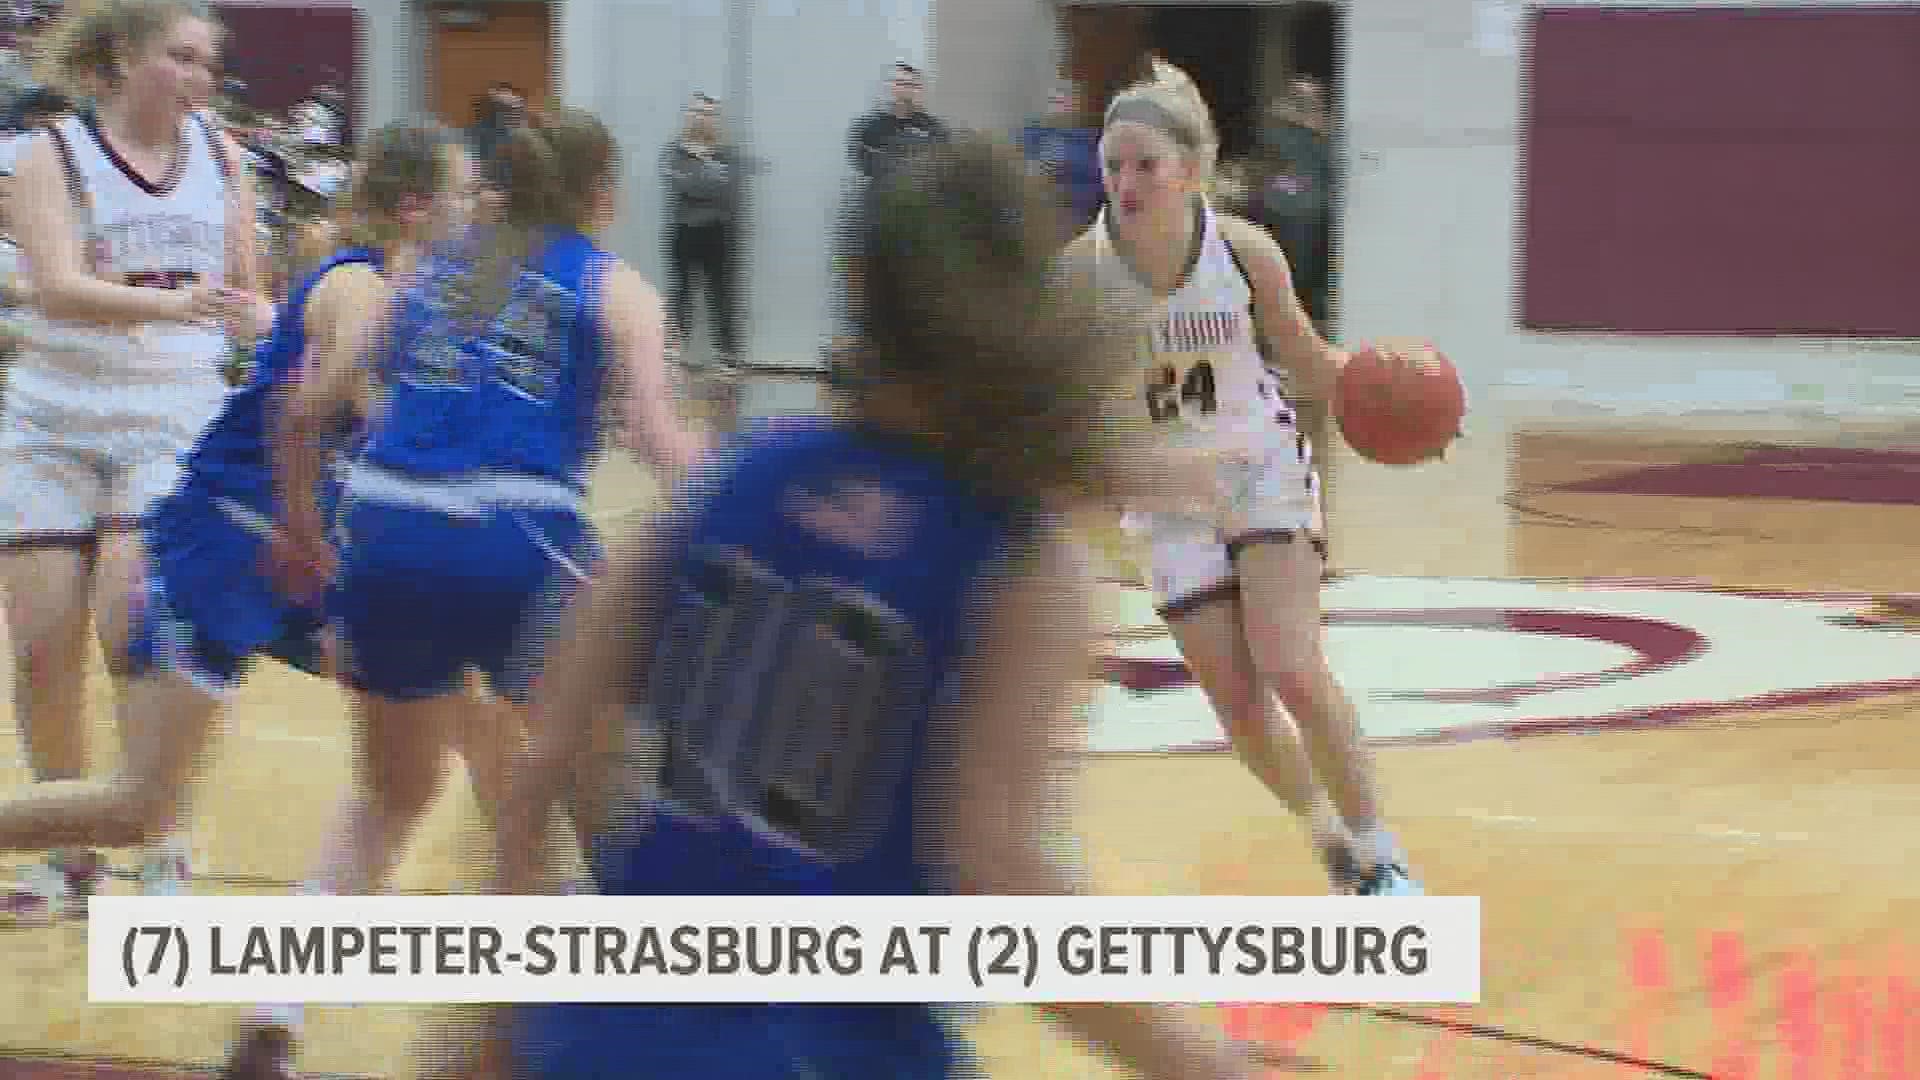 It was an action-packed night on the high school girls' hardwood.